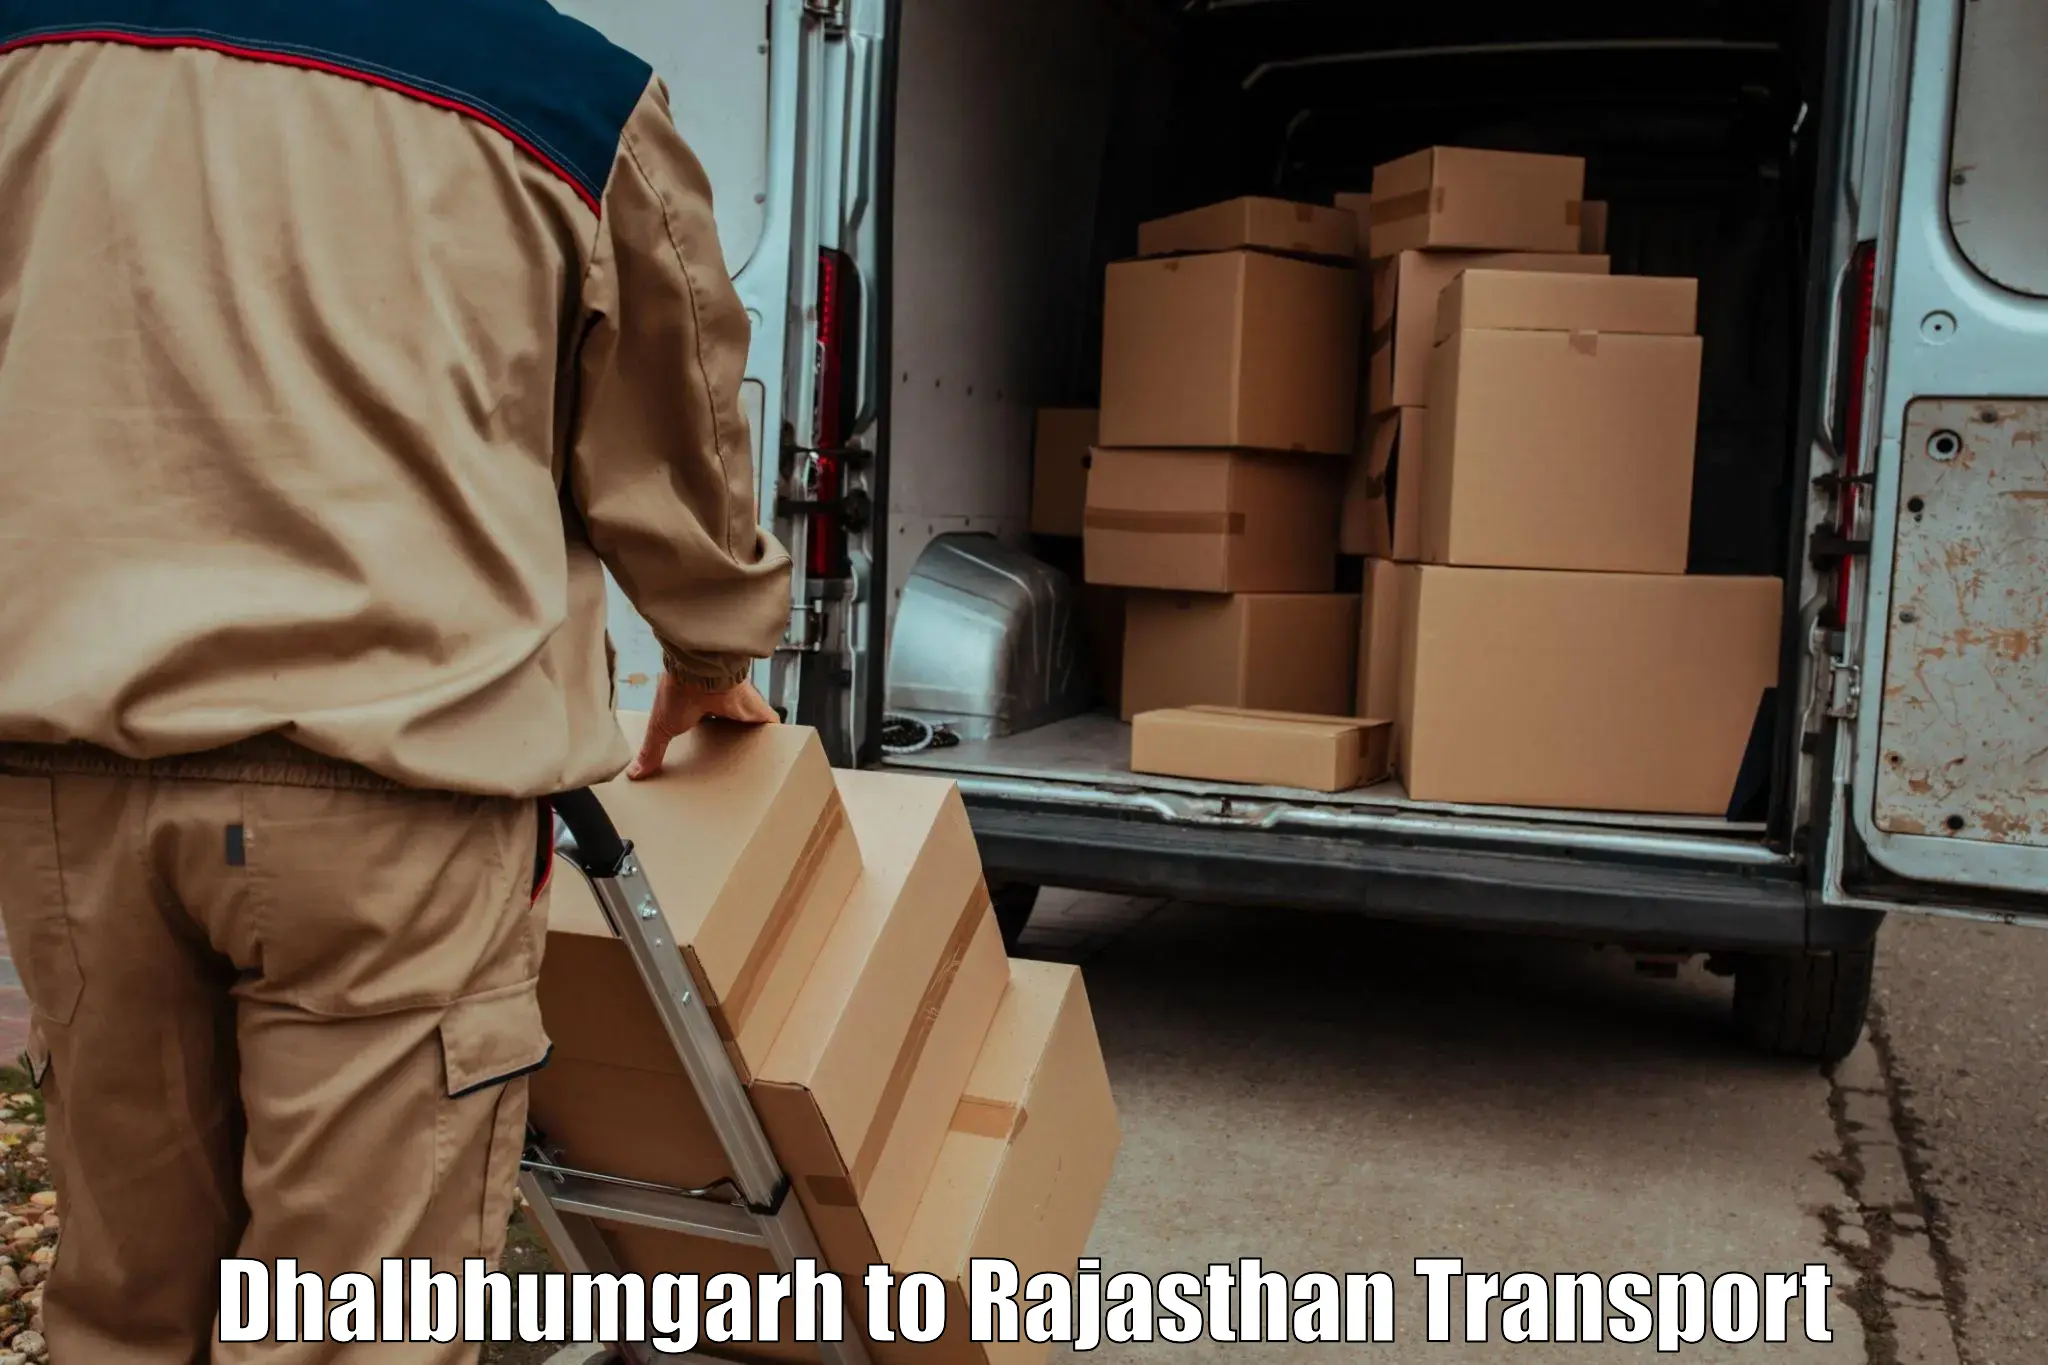 Nearby transport service Dhalbhumgarh to Dholpur